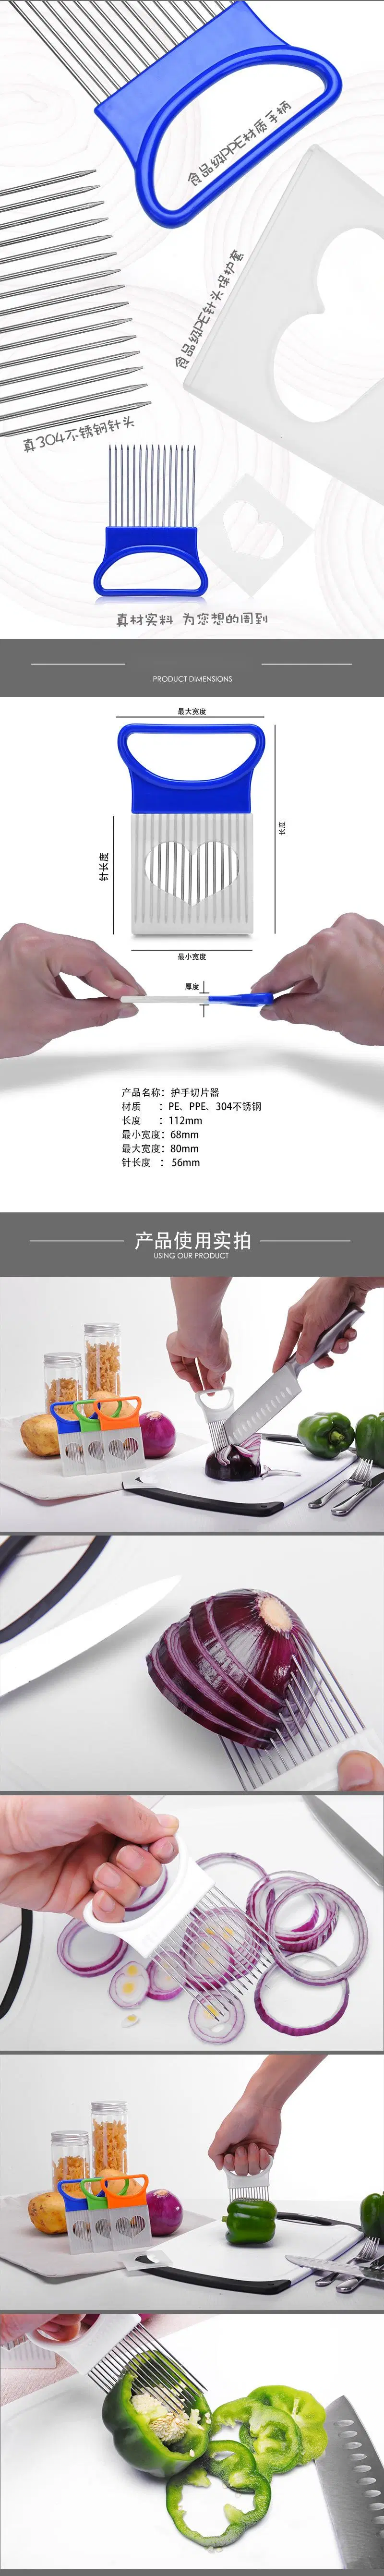 Kitchen Stainless Steel Onion Fruit Vegetable Cutter Slicing Hand Guards Utensil